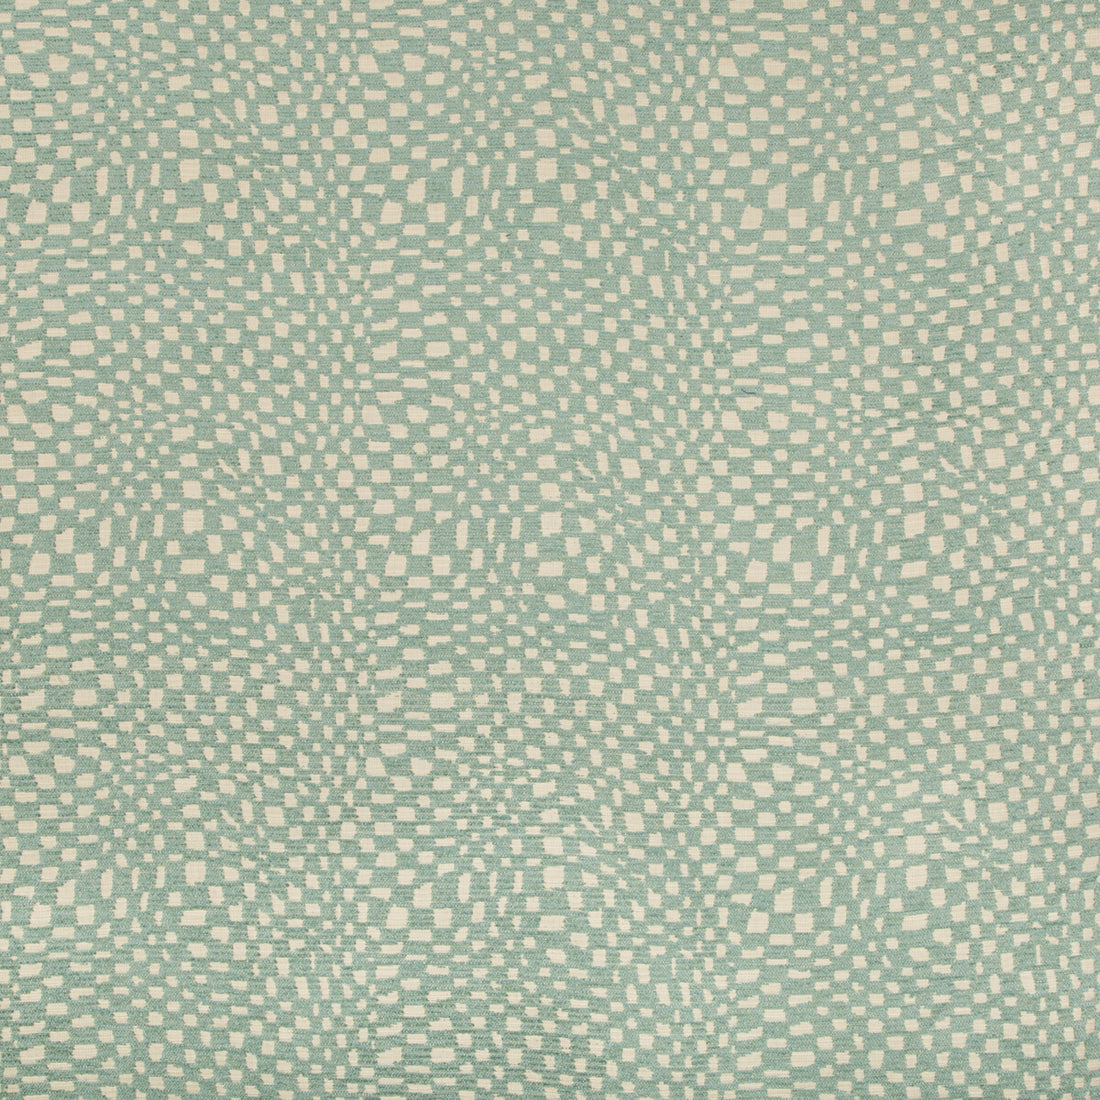 Wade fabric in seaglass color - pattern GWF-3741.135.0 - by Lee Jofa Modern in the Kw Terra Firma II Indoor Outdoor collection